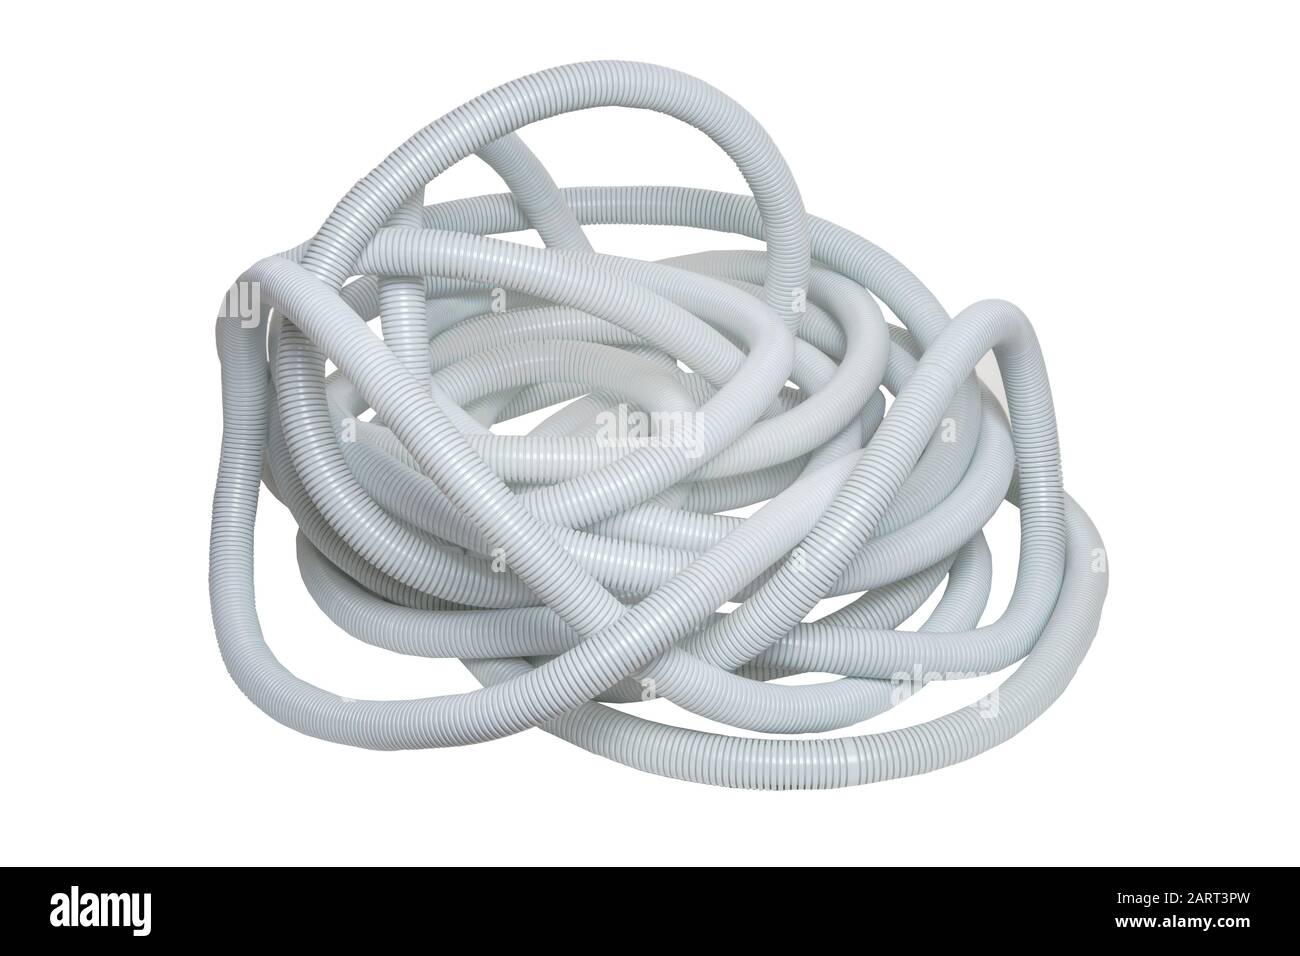 Plastic hose isolated. Close-up of a disorderly bunch of light gray industrial flexible plastic corrugated pipe for electrical cable installations iso Stock Photo